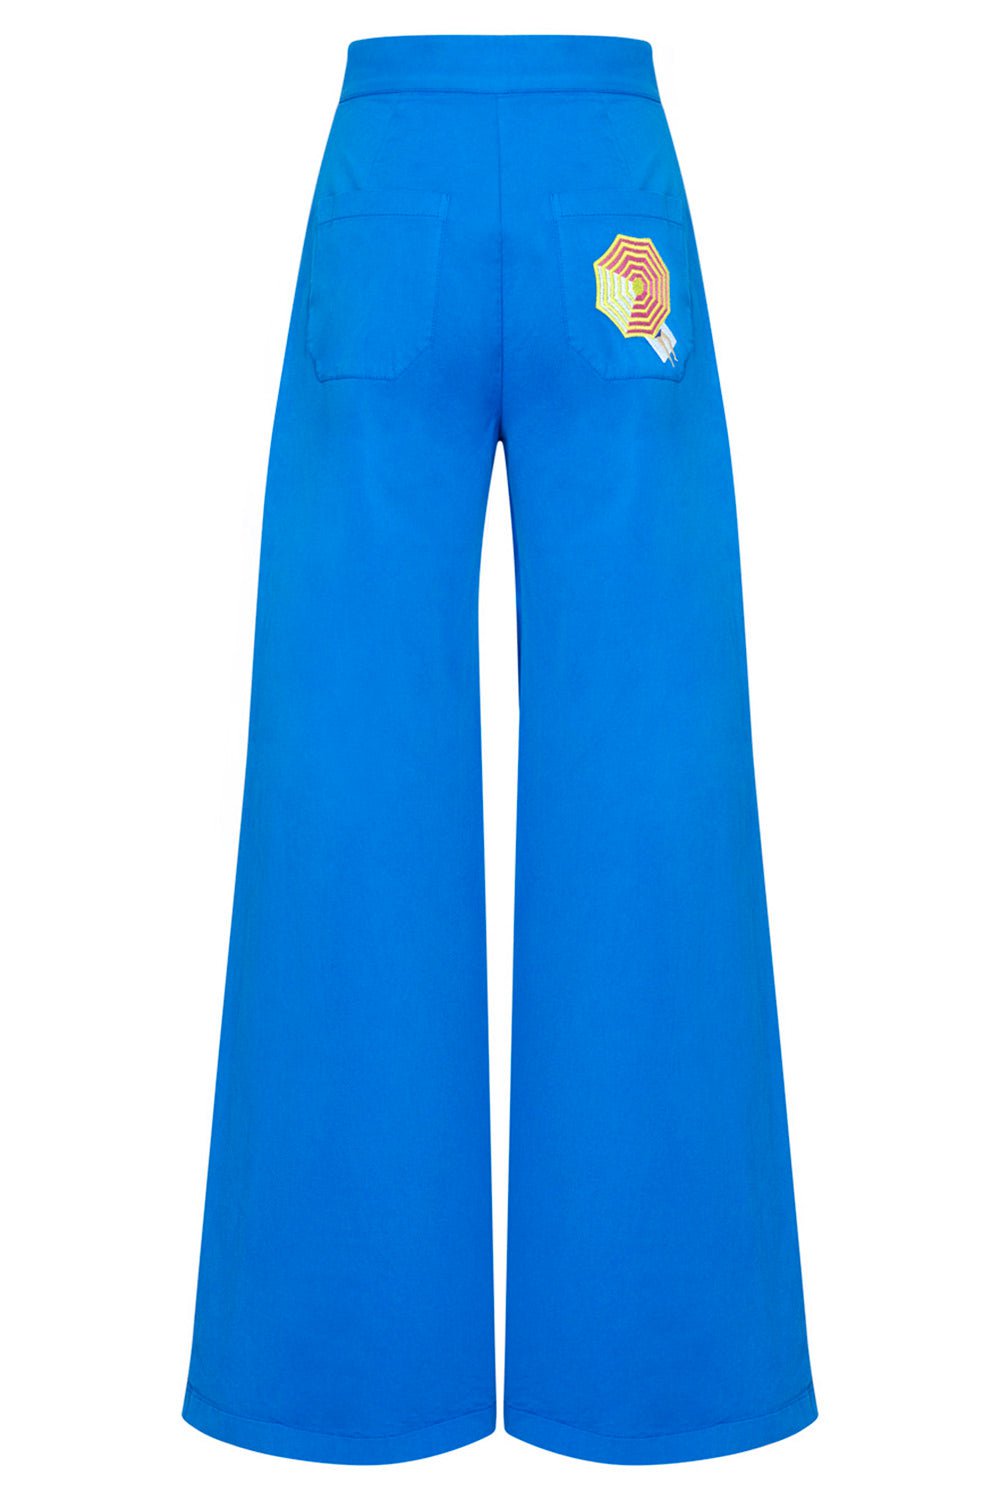 Les signatures - recycled sailor trousers, length 30.5